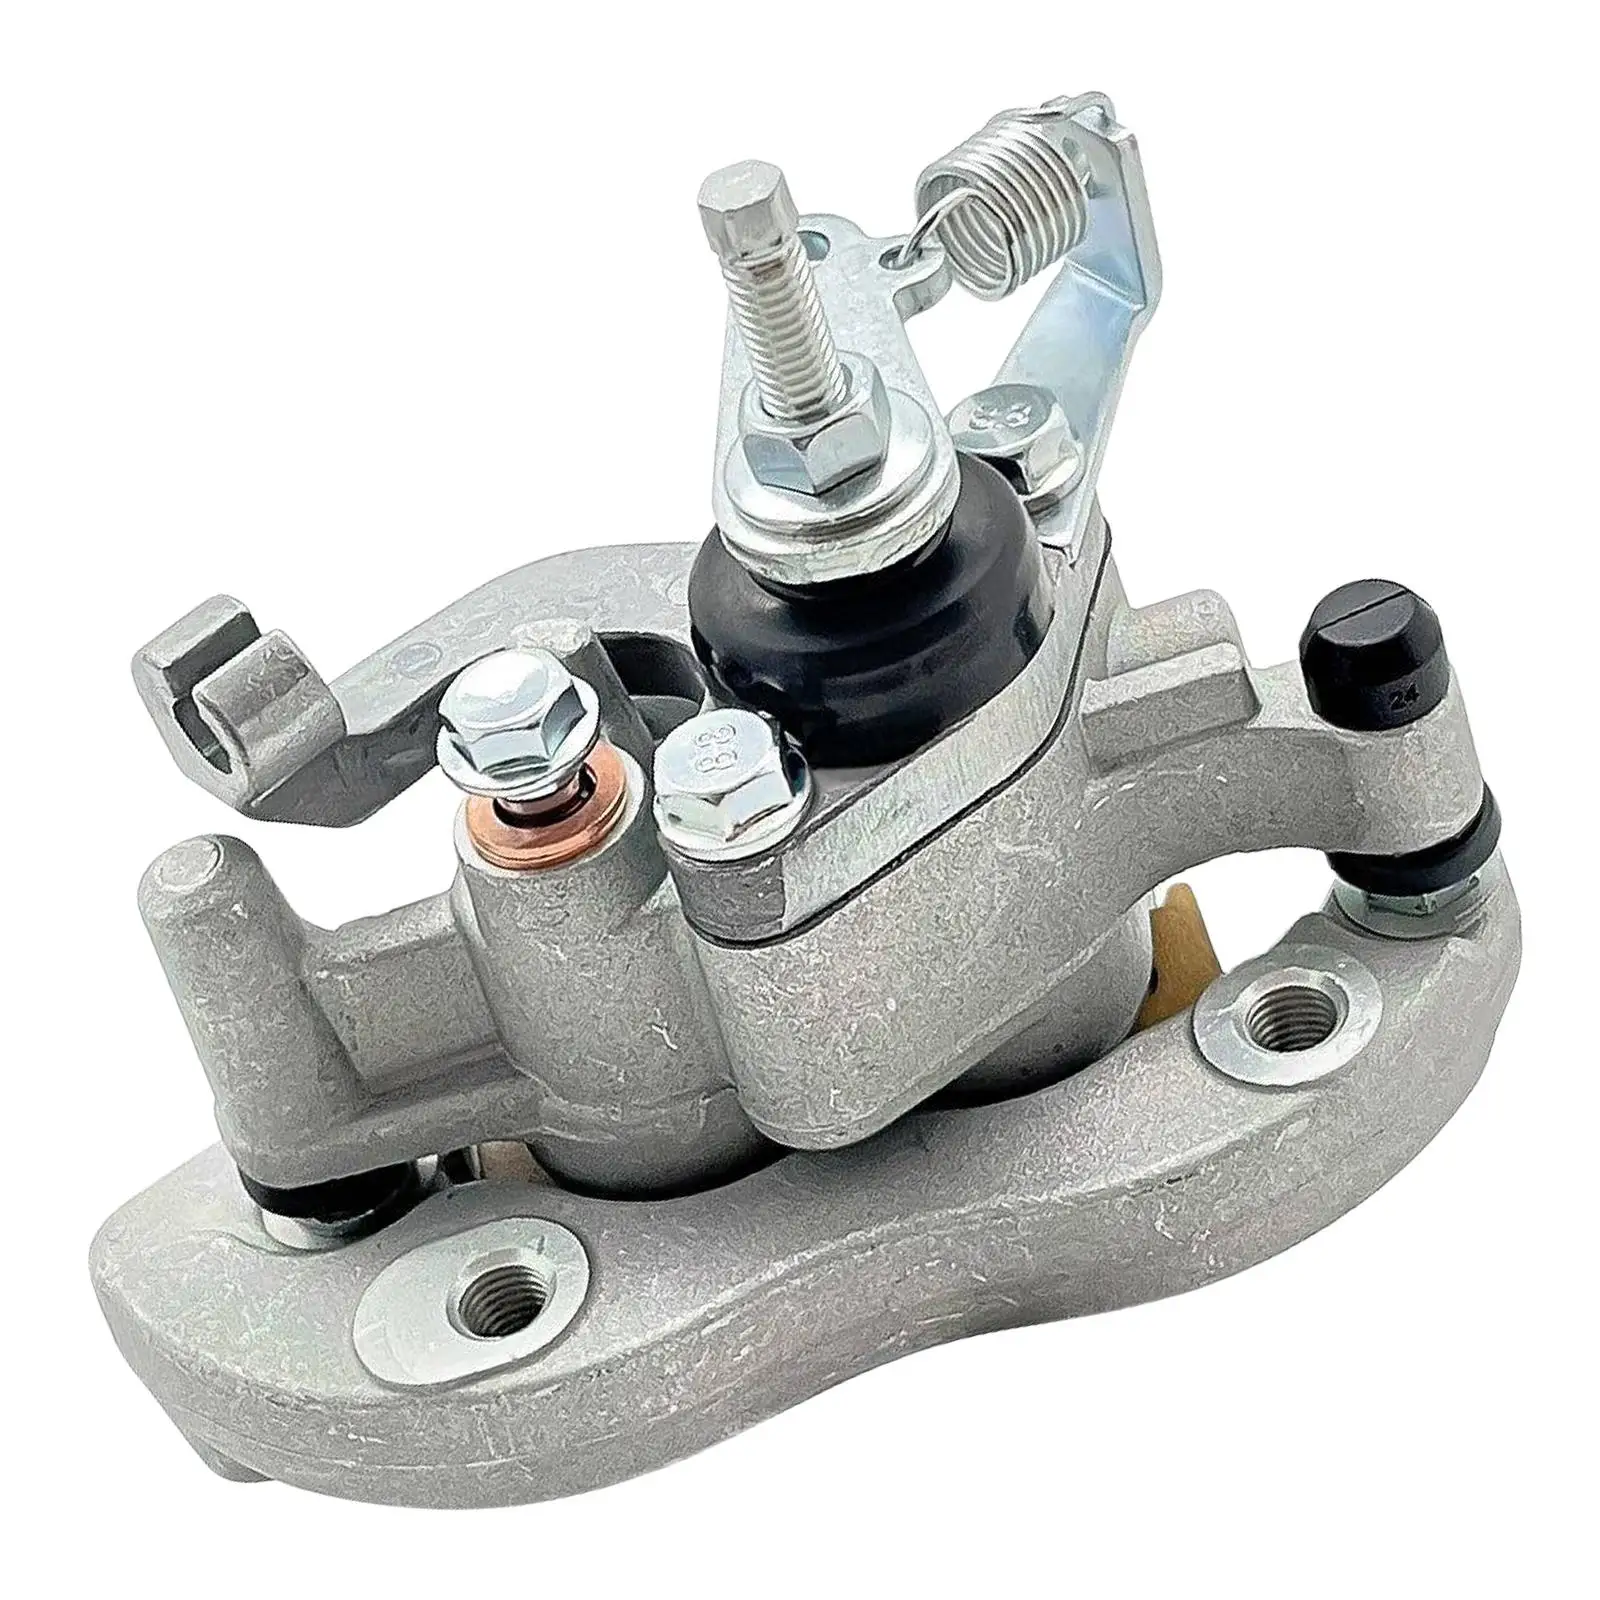 Rear Brake Caliper Replaces 5TG-2580W-21-00 Durable Spare Parts for Yfz450